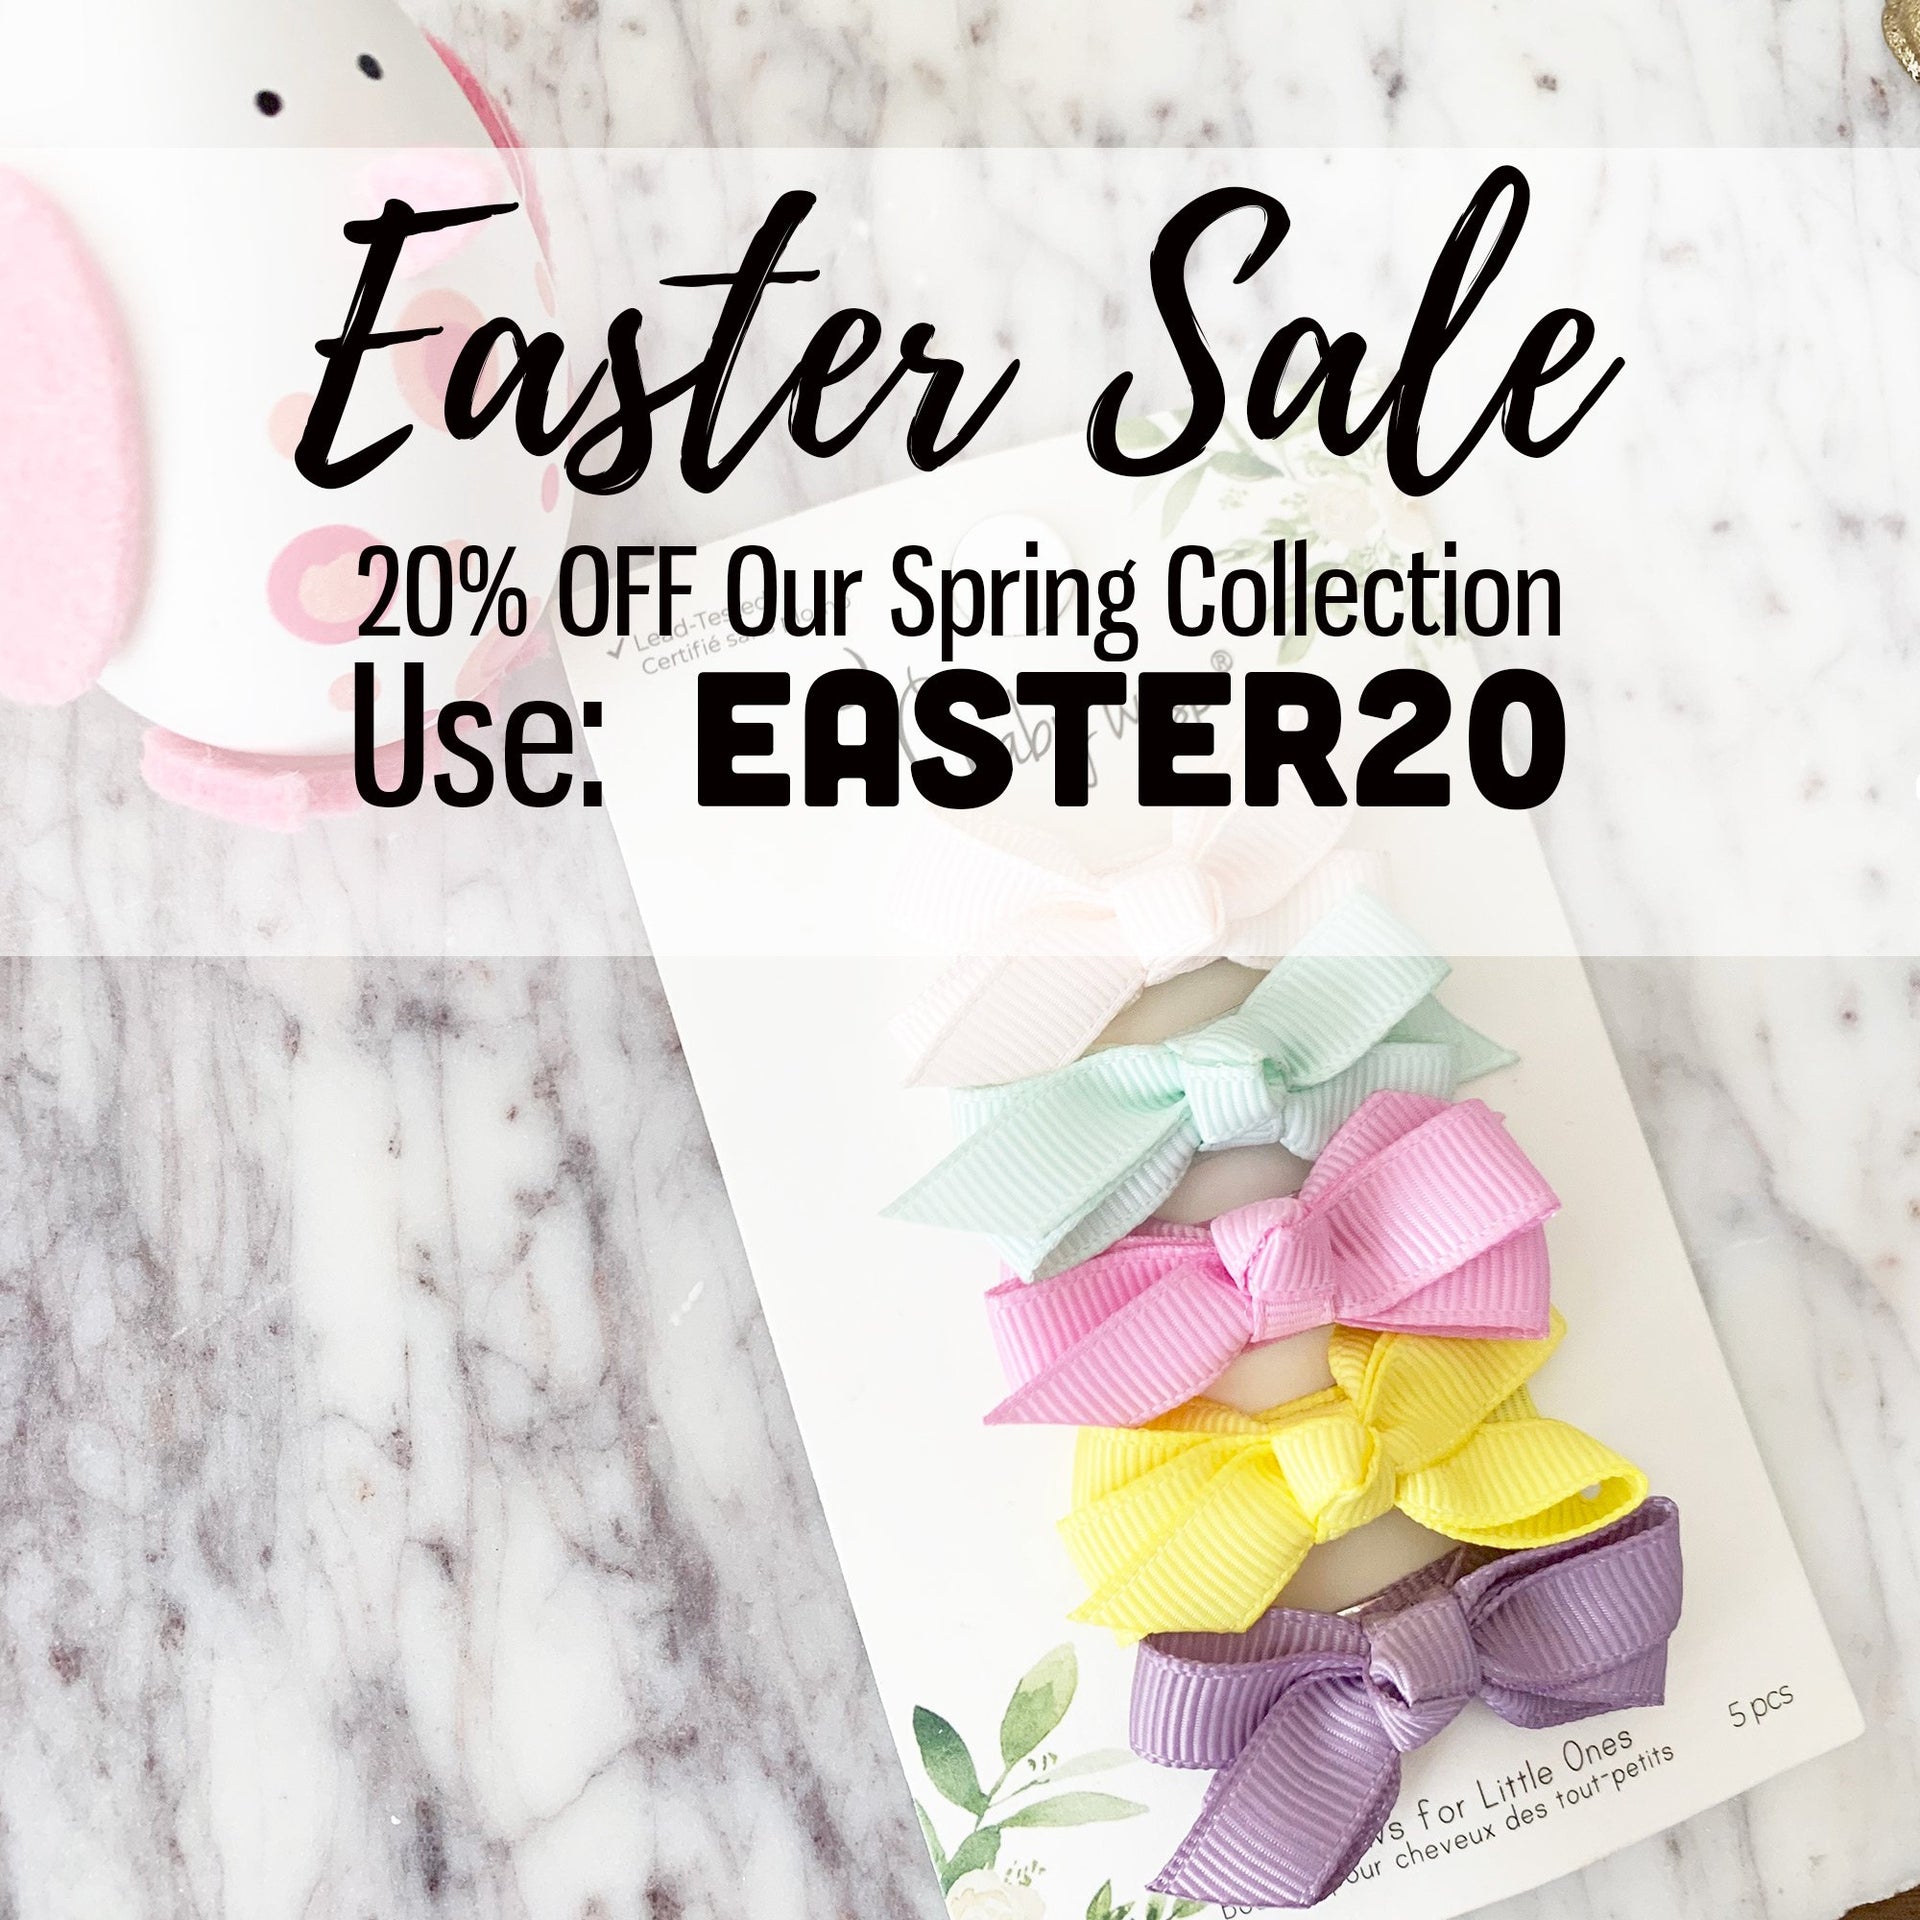 Easter Sale Now On!